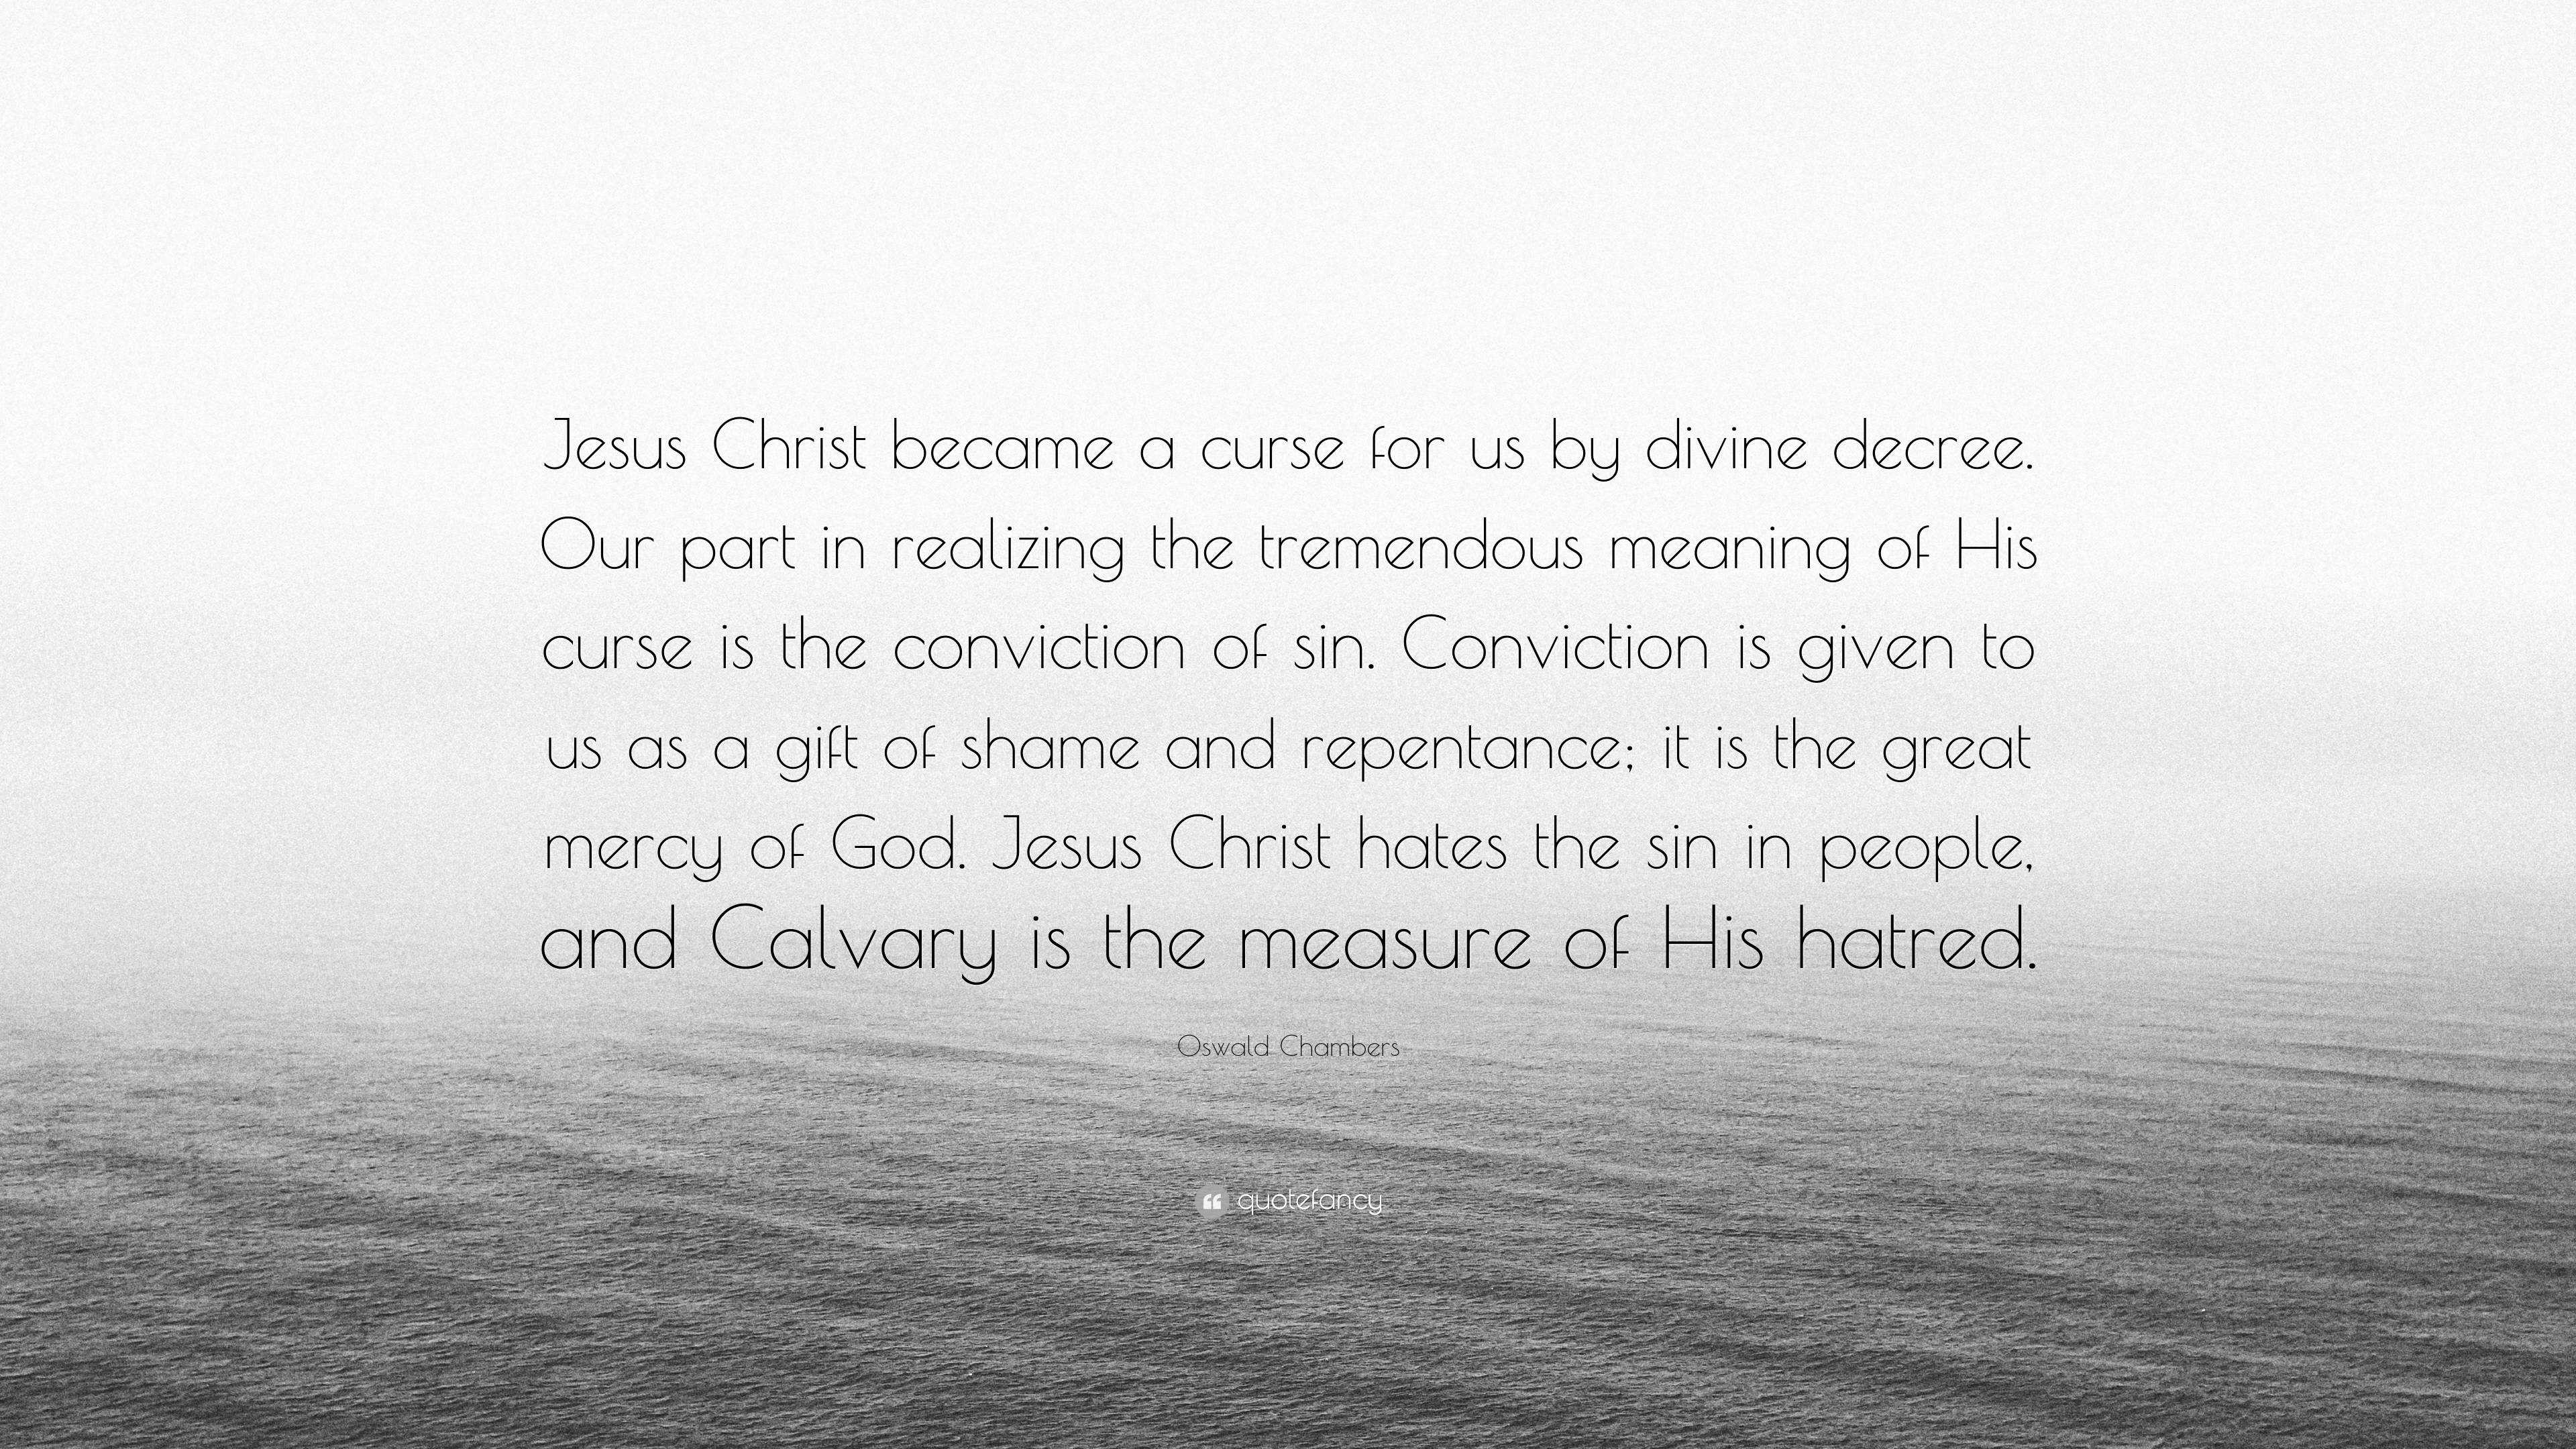 Oswald Chambers Quote: “Jesus Christ became a curse for us by divine  decree. Our part in realizing the tremendous meaning of His curse is the  co”